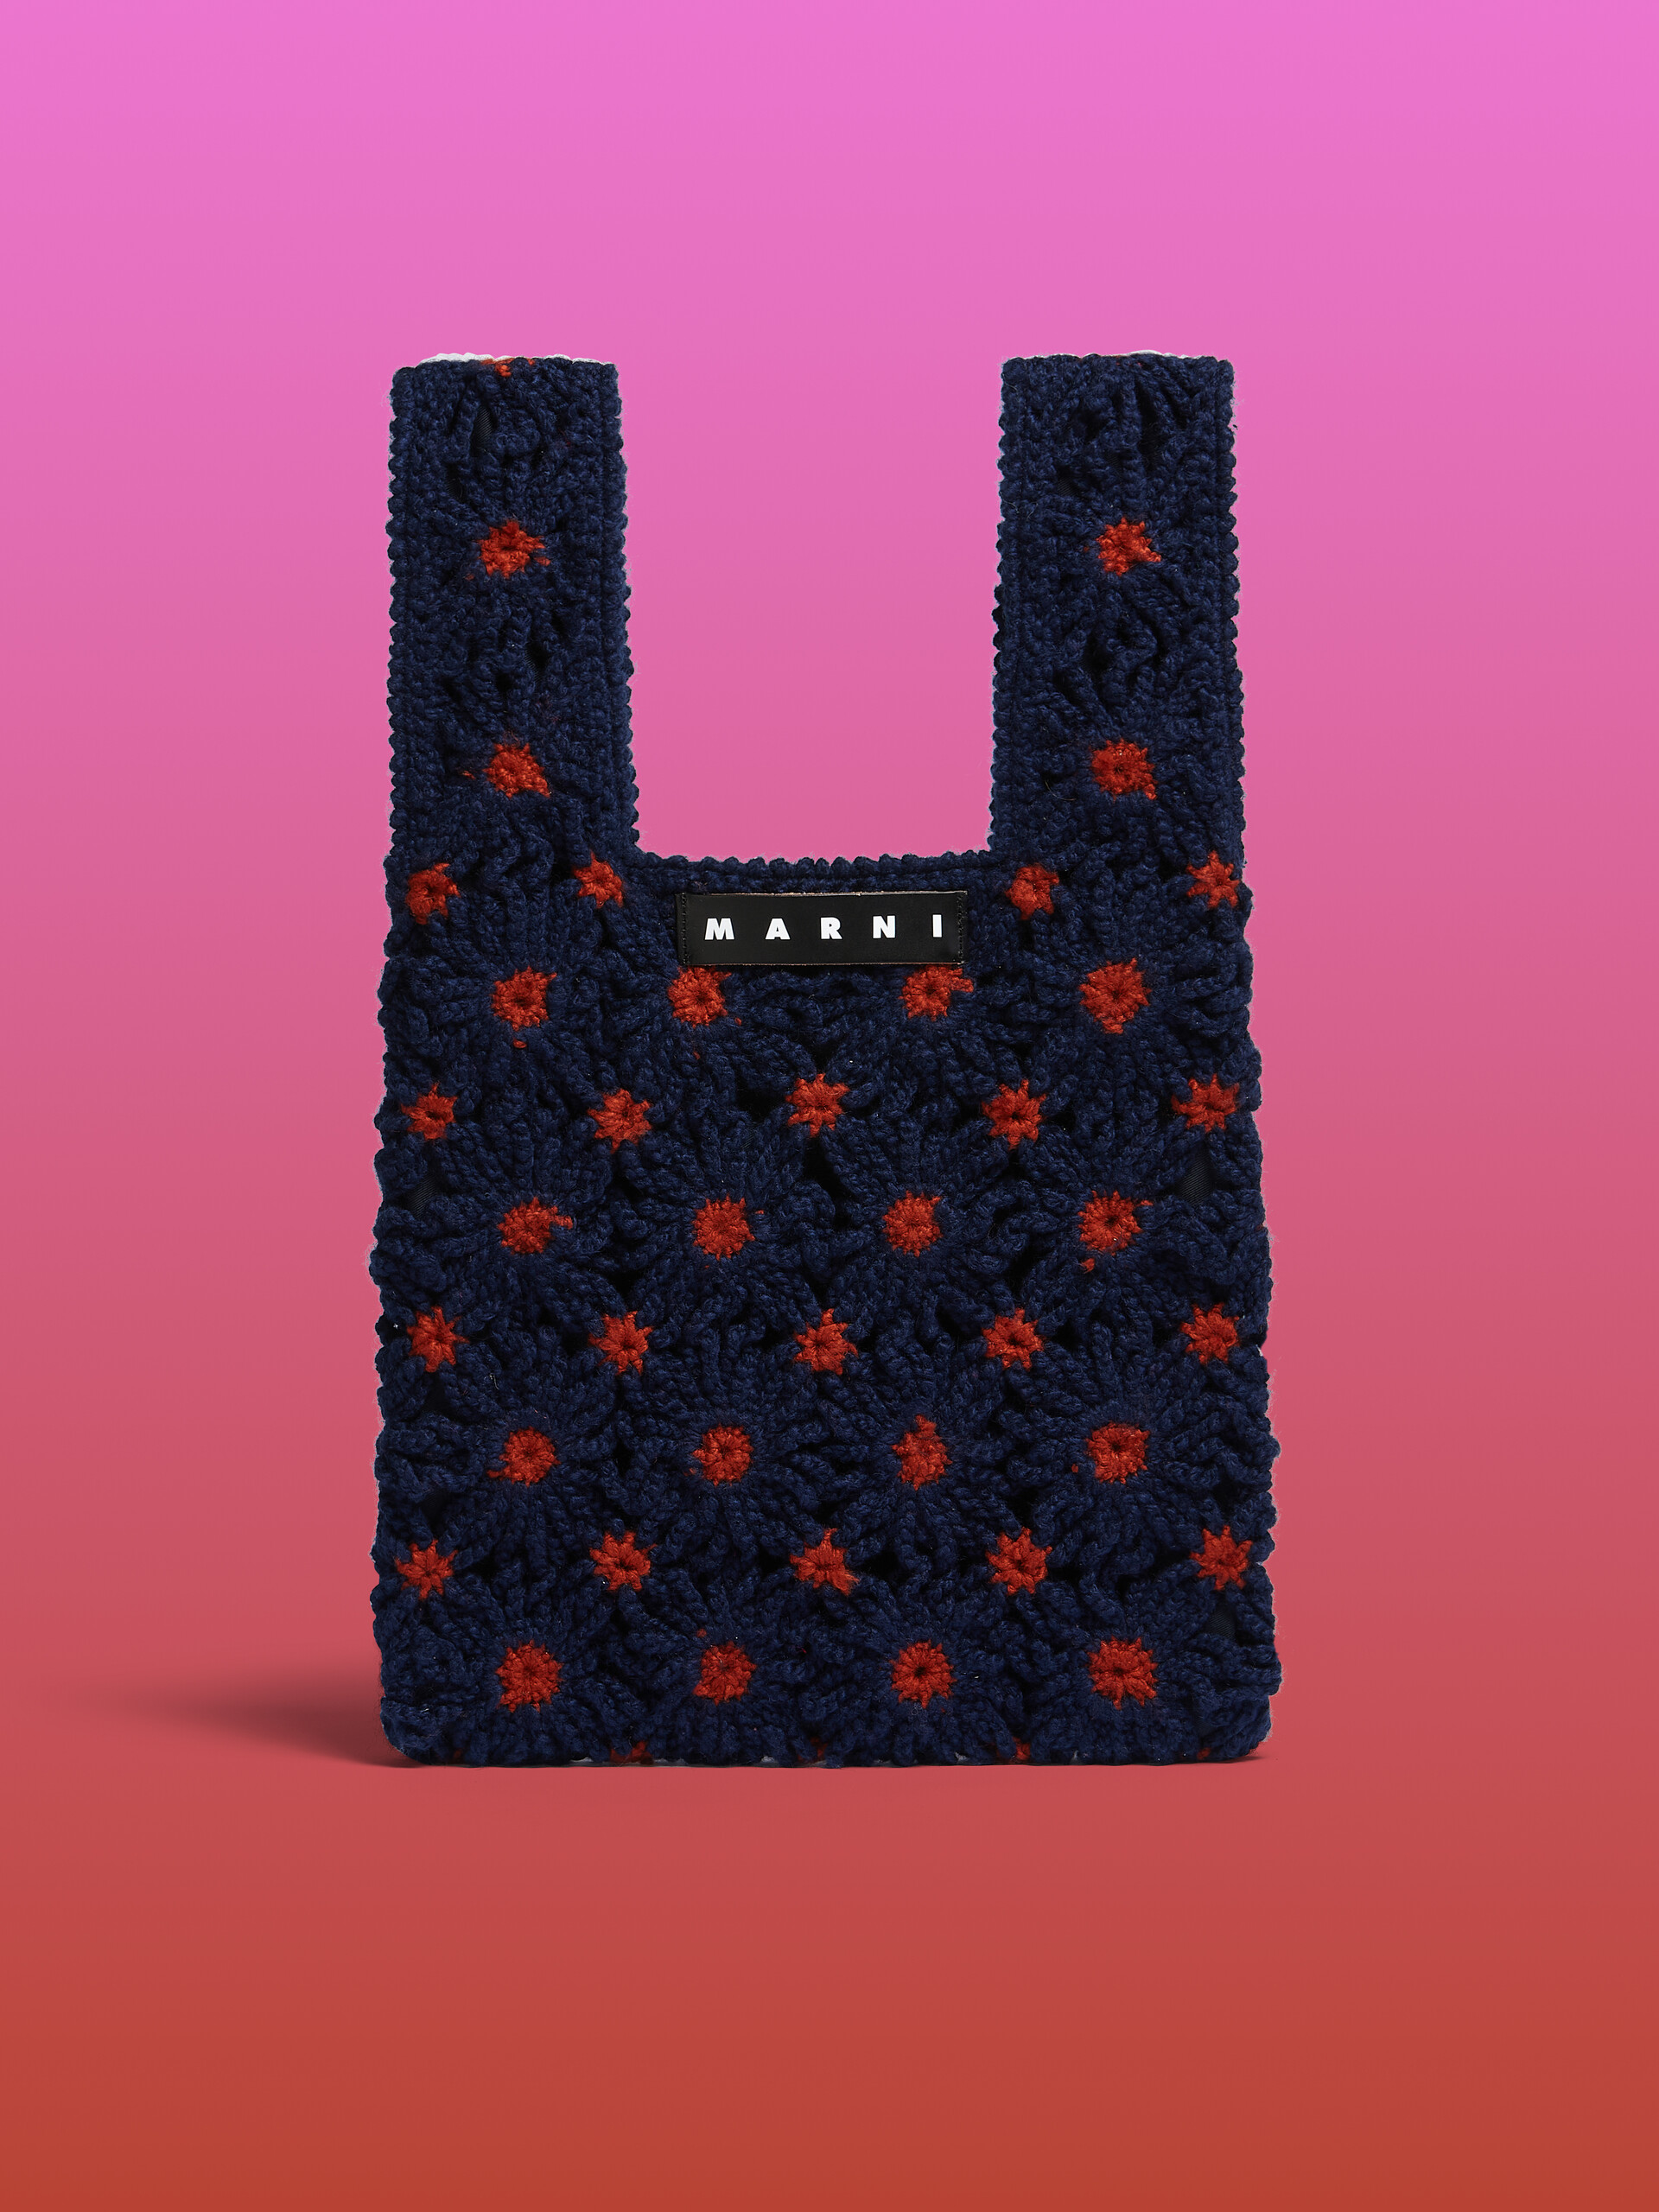 MARNI MARKET FISH bag in blue and red crochet - Bags - Image 1